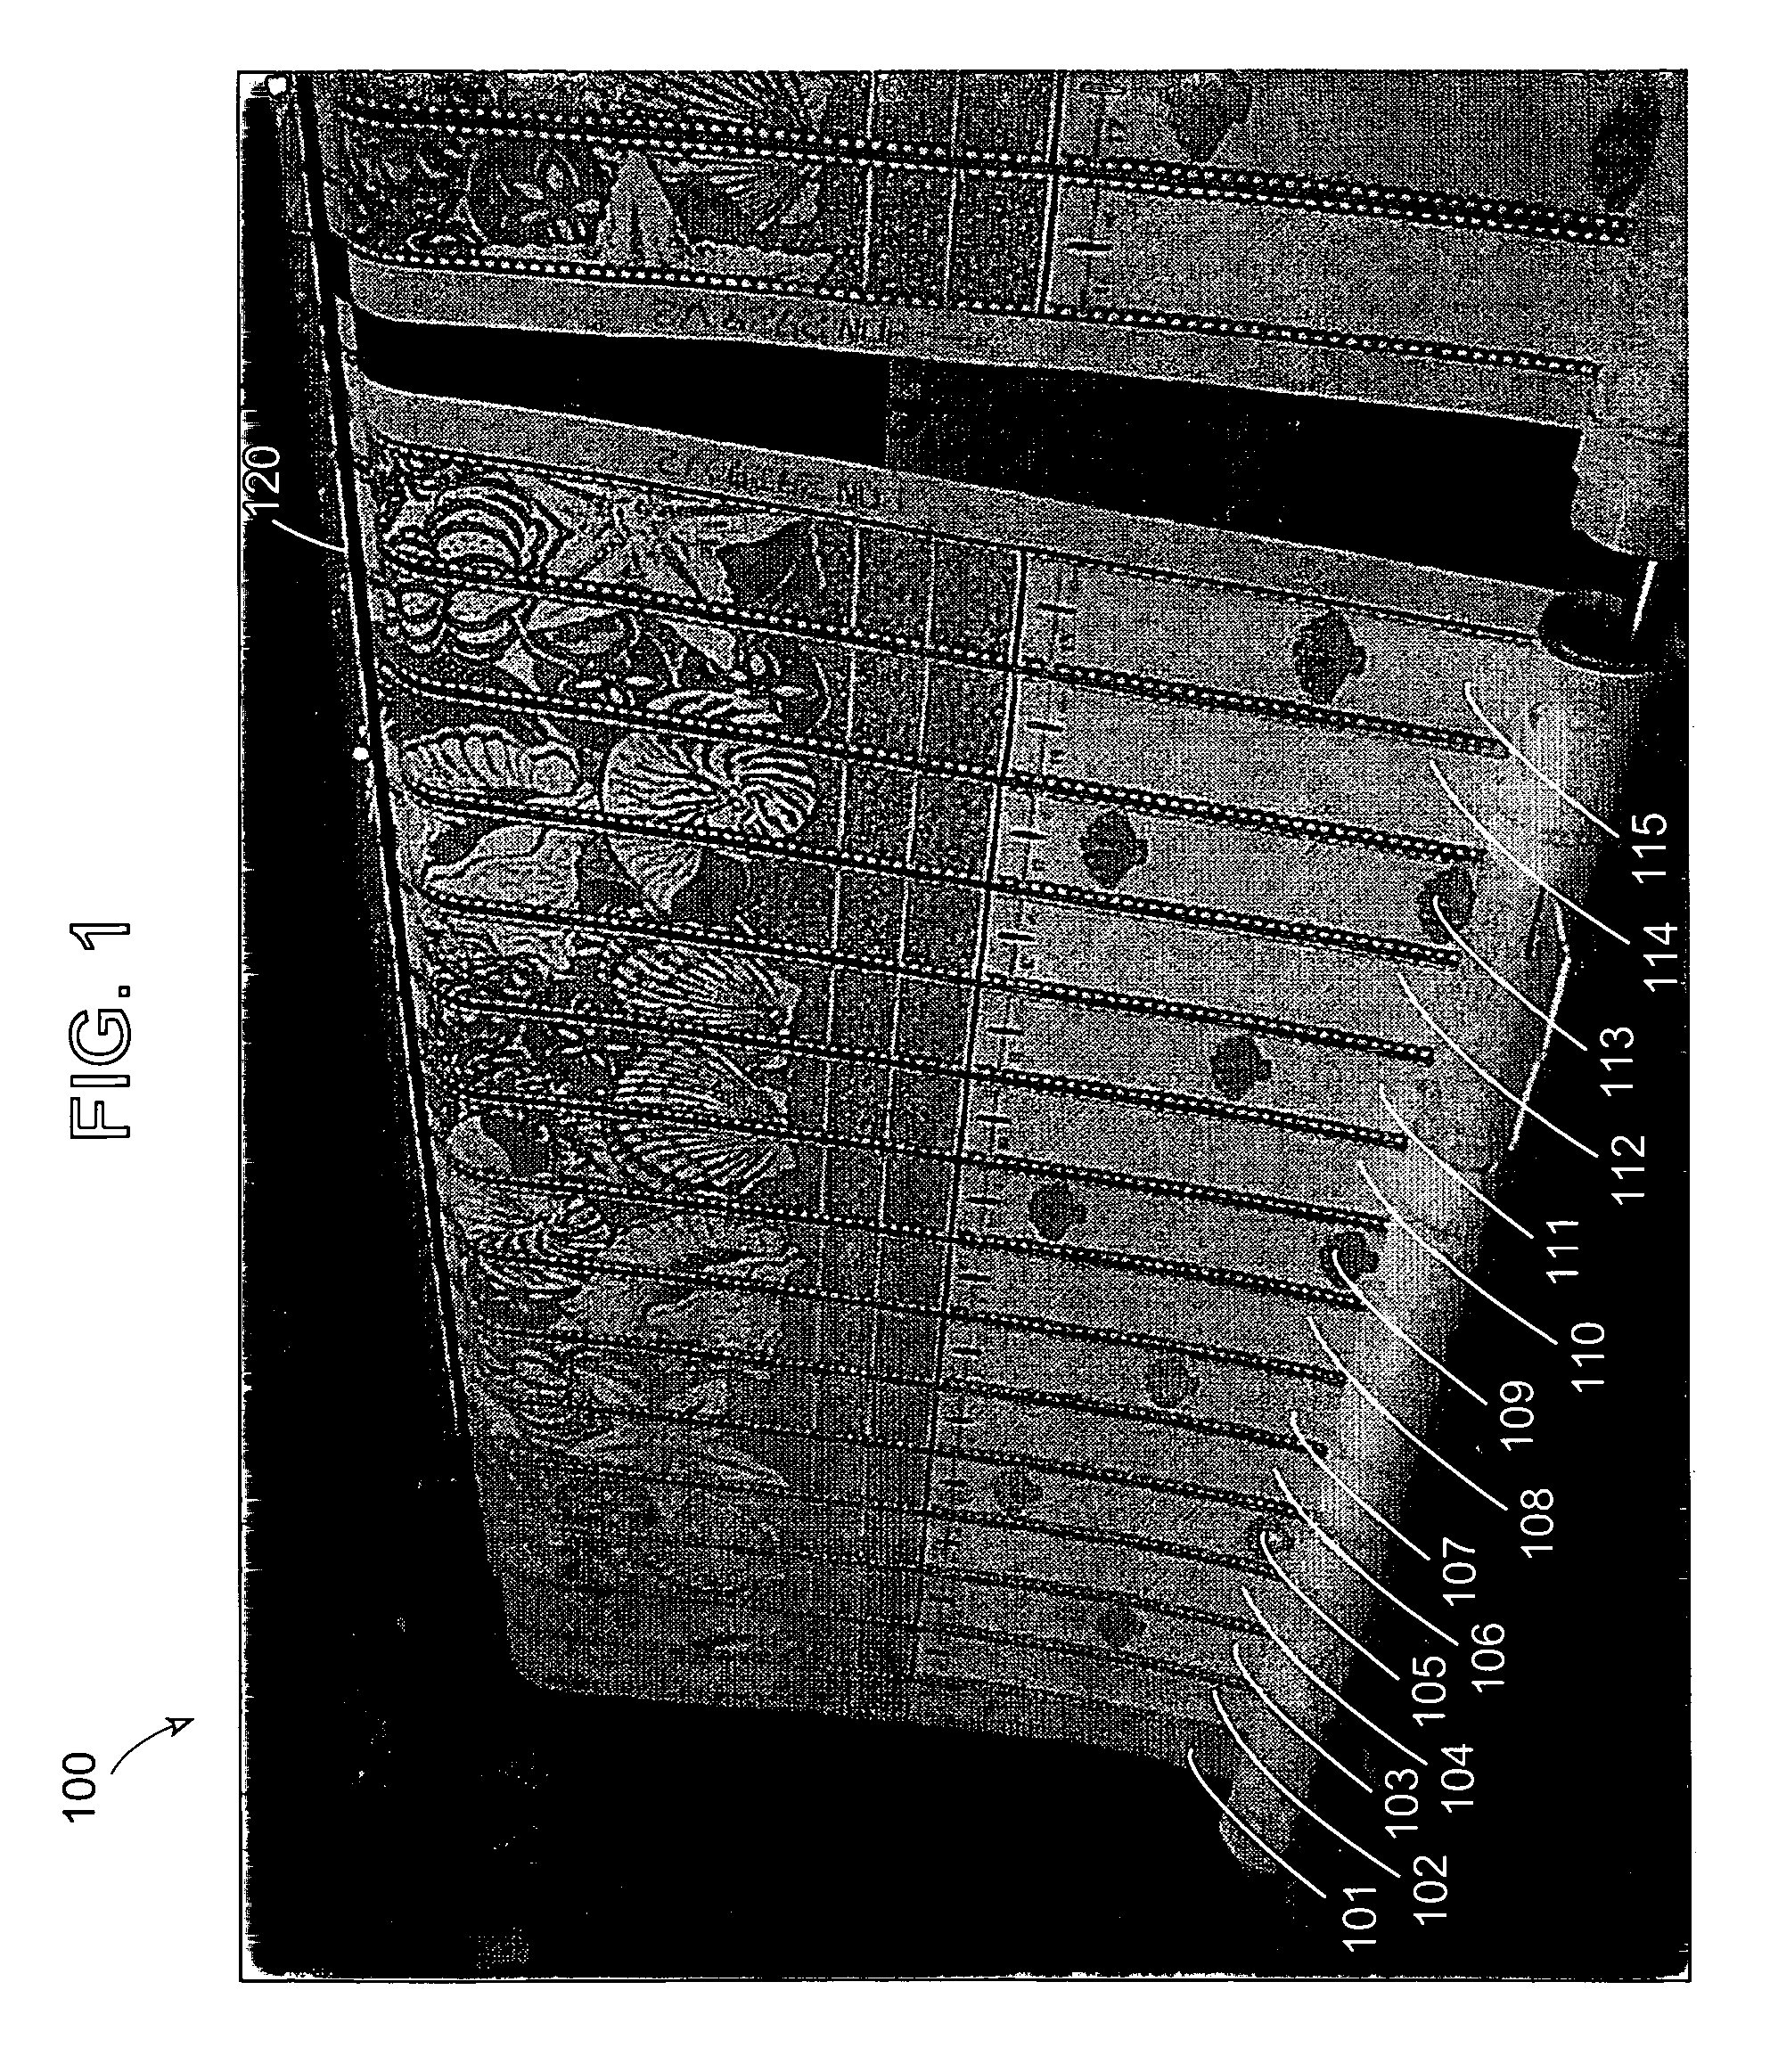 Frayless frangible connection for fabric and vertical blind system incorporating the same